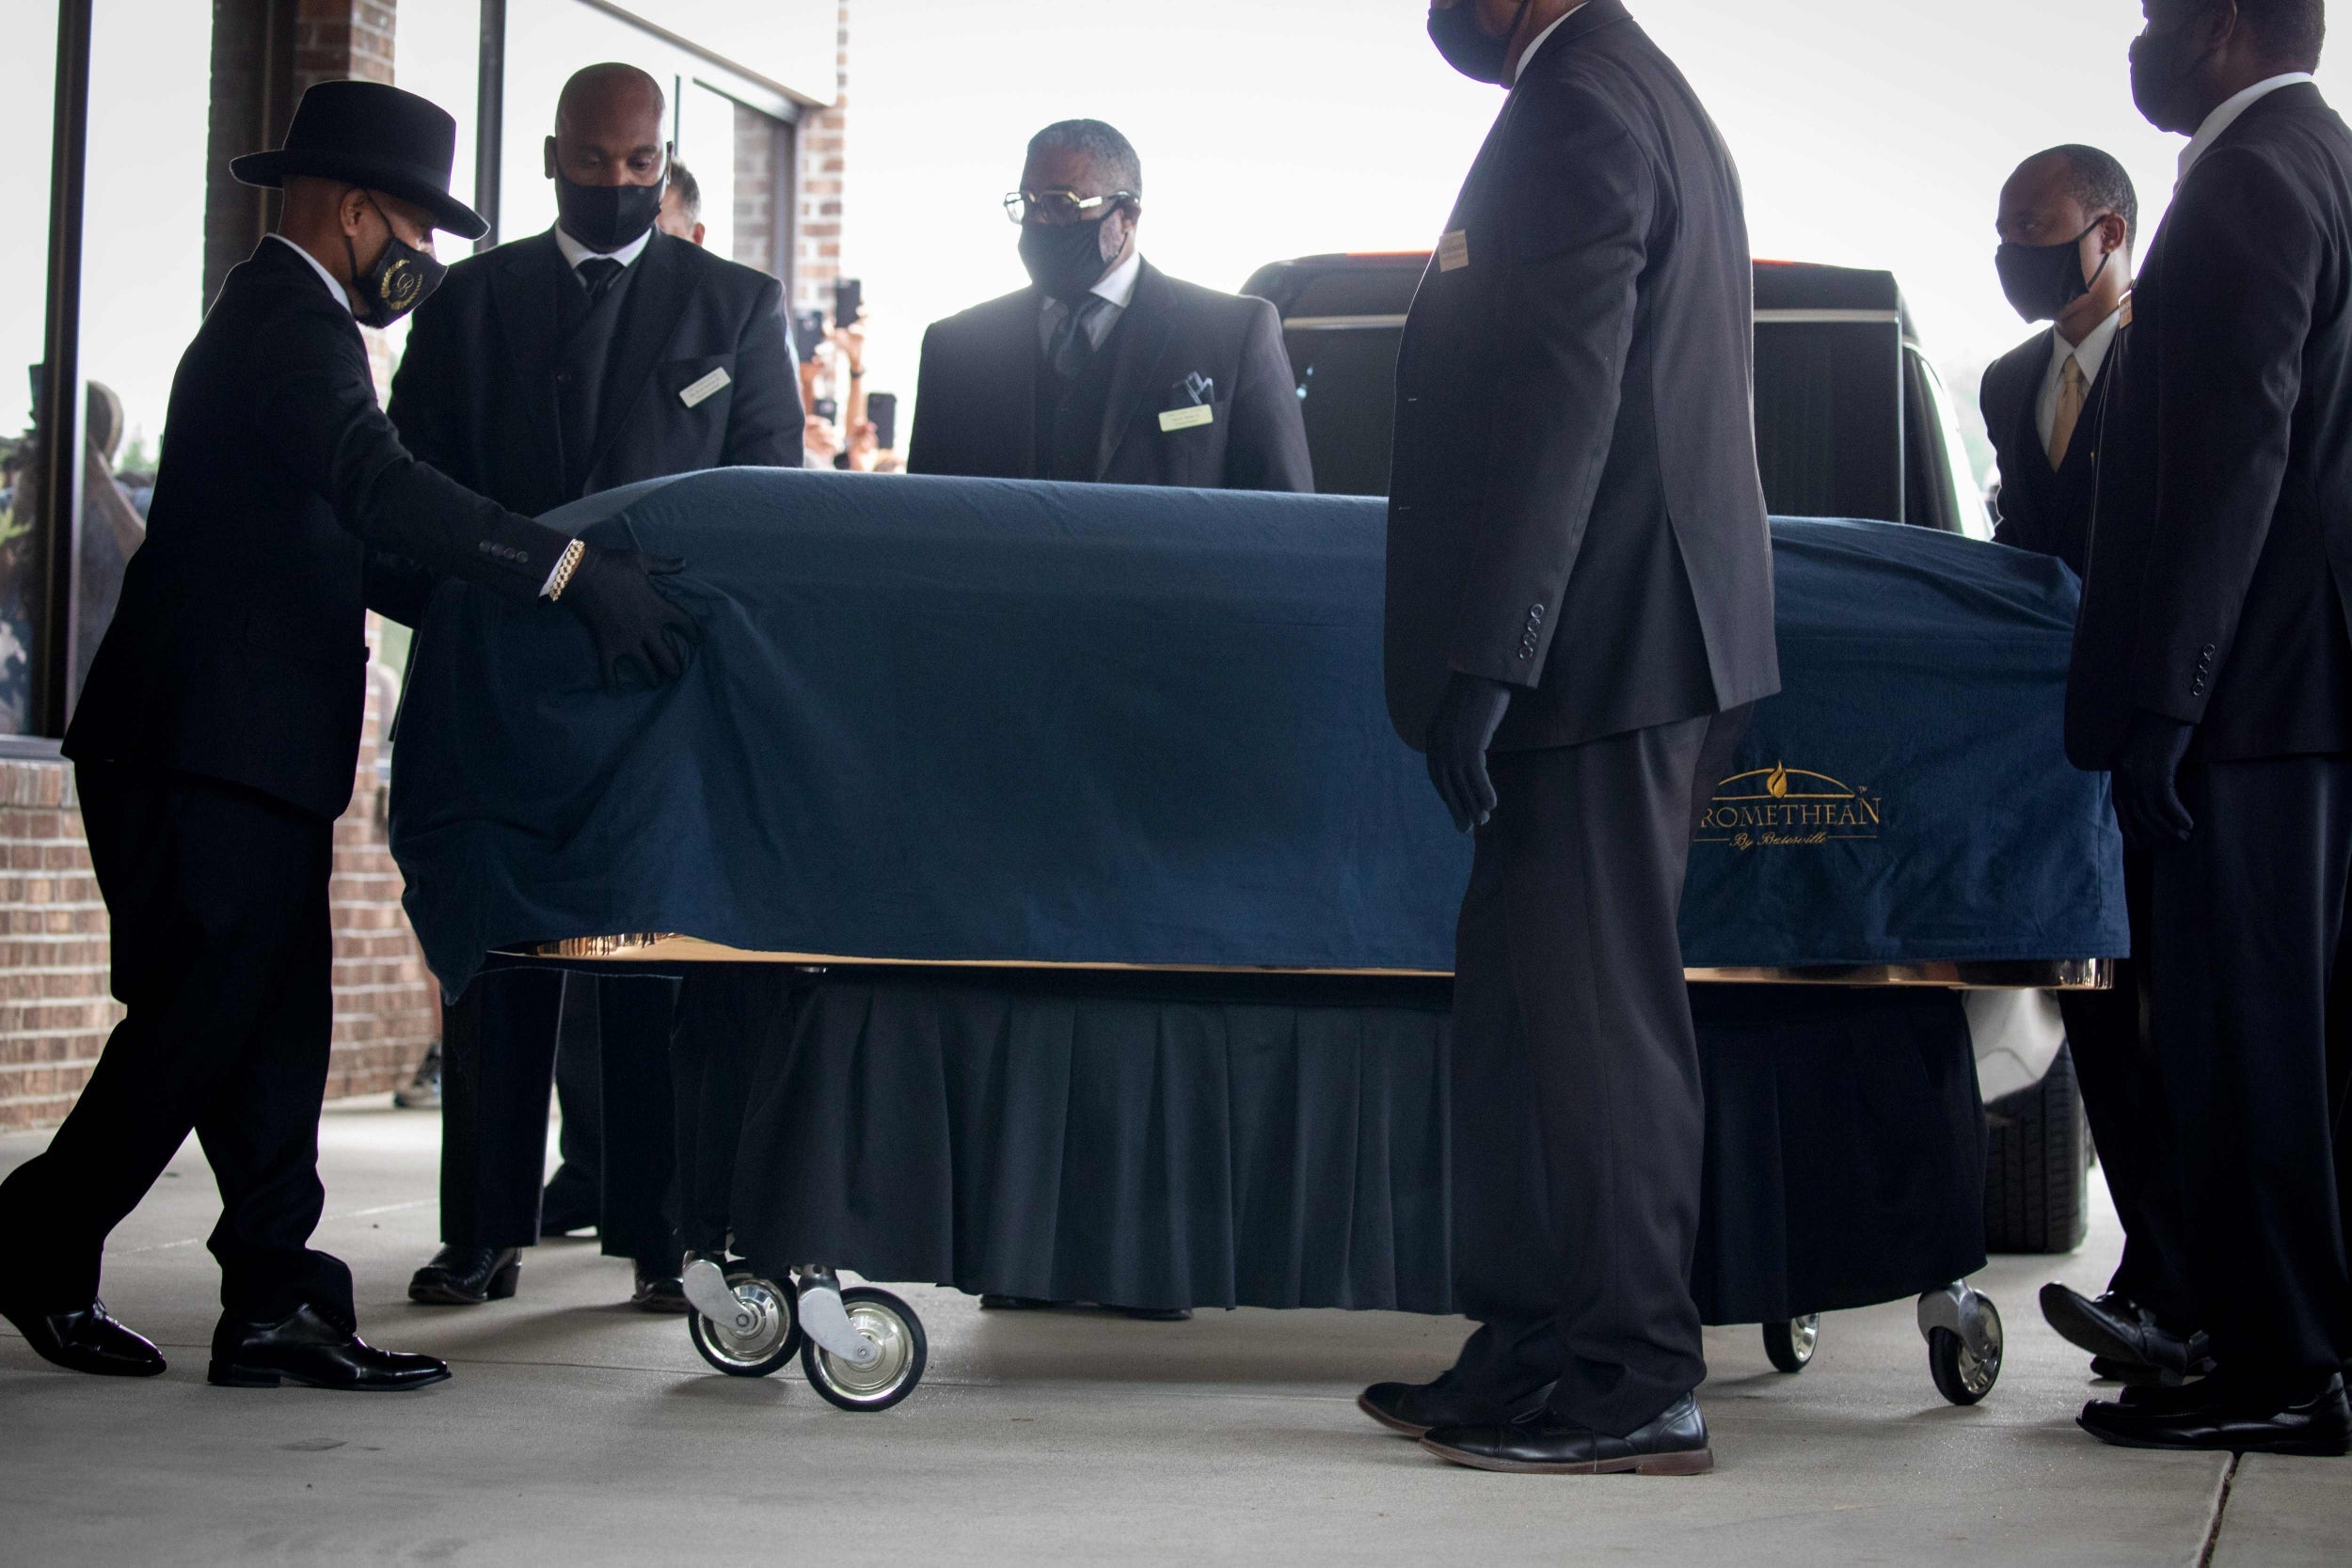 Thousands of mourners gather for George Floyd memorial service in his home state of North Carolina